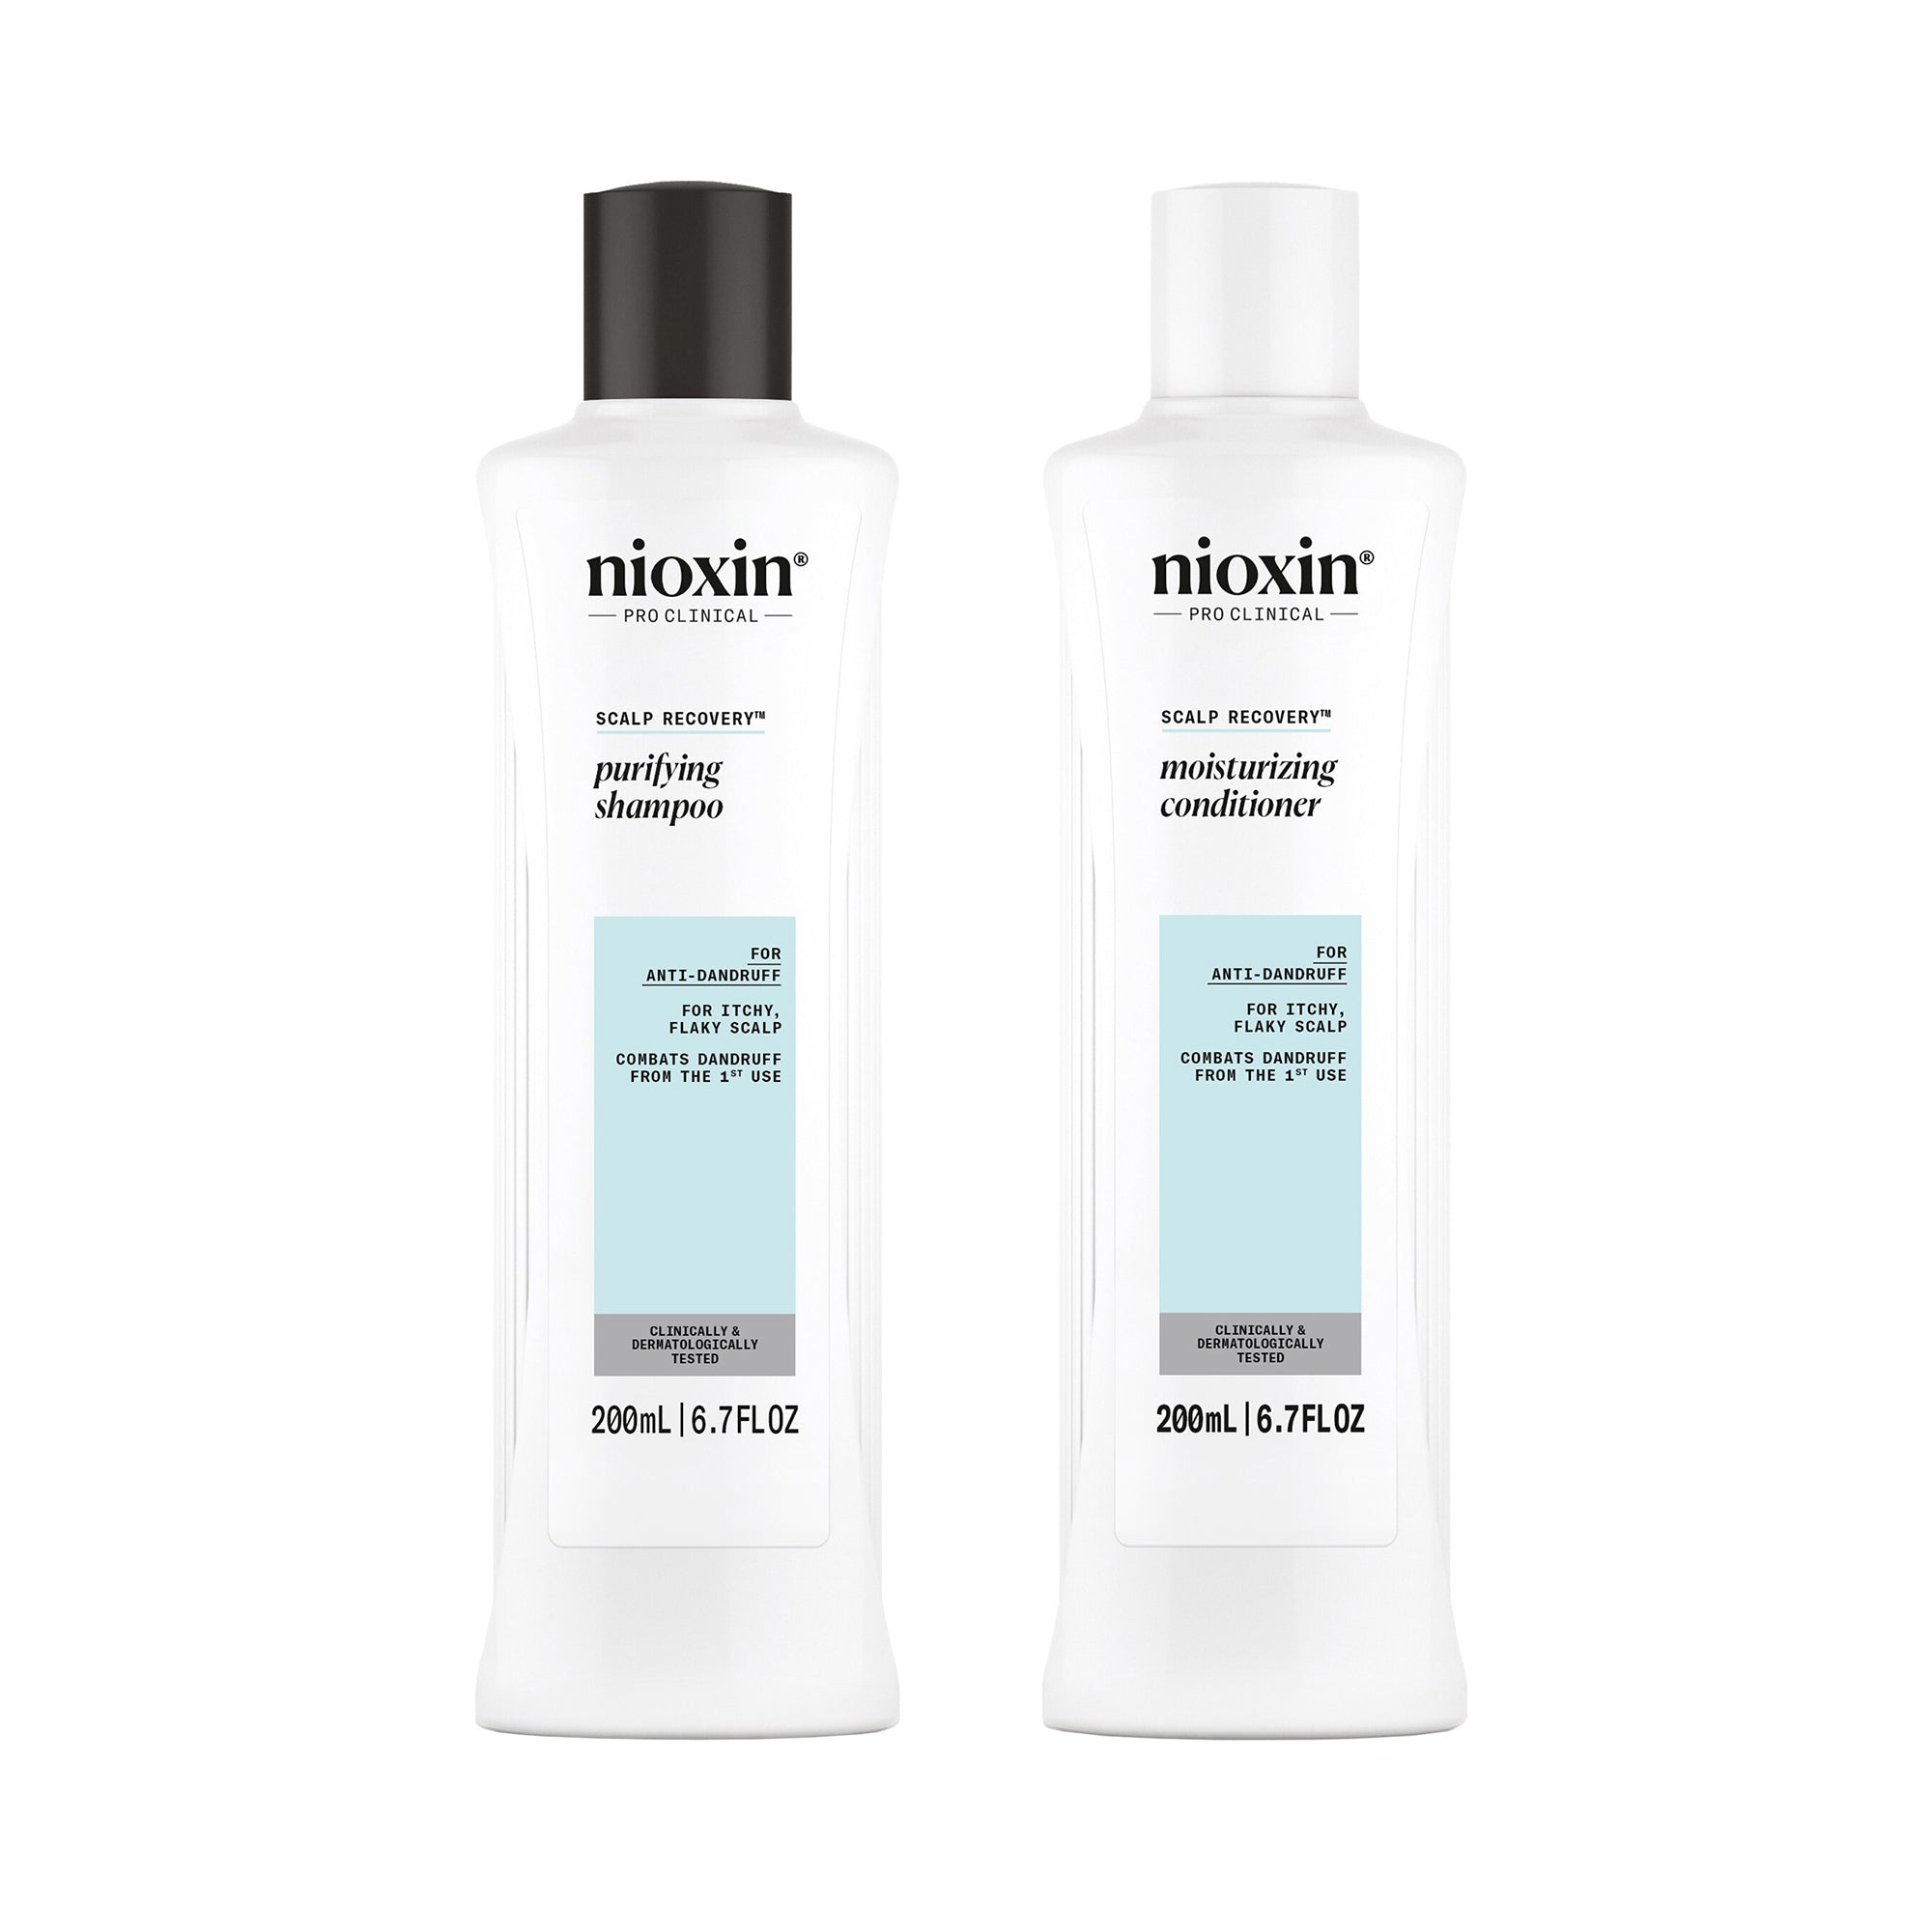 Nioxin Scalp Recovery Purifying Shampoo and Moisturizing Conditioner 6.7oz Duo ($52 Value) / 6.7OZ